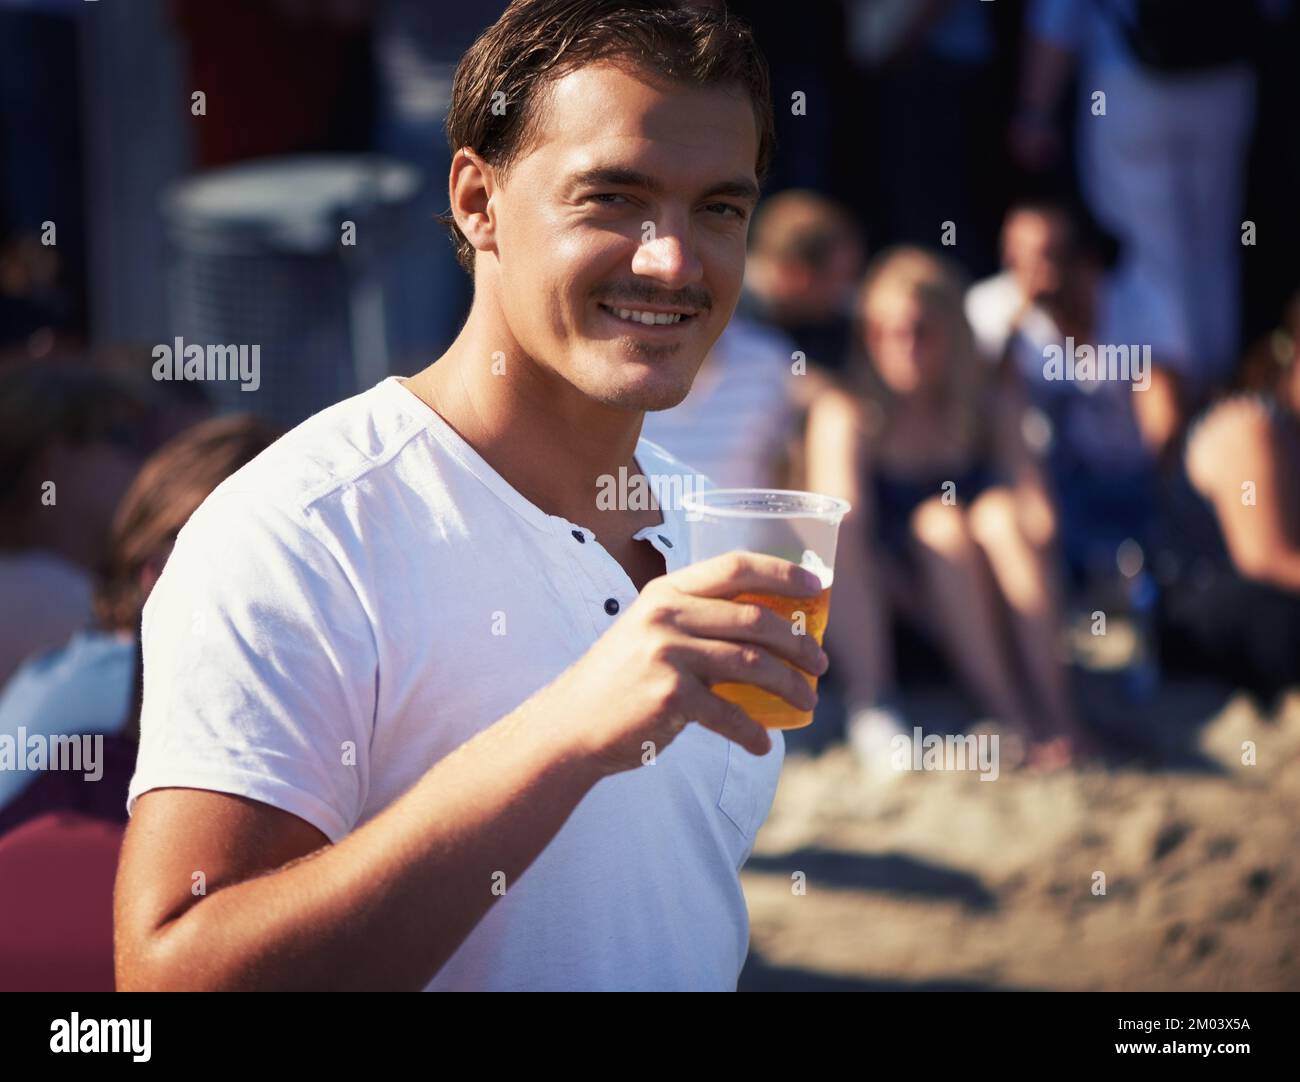 Crisp and fresh. Portrait of a young man enjoying a cool, crisp beer at a music festival. Stock Photo